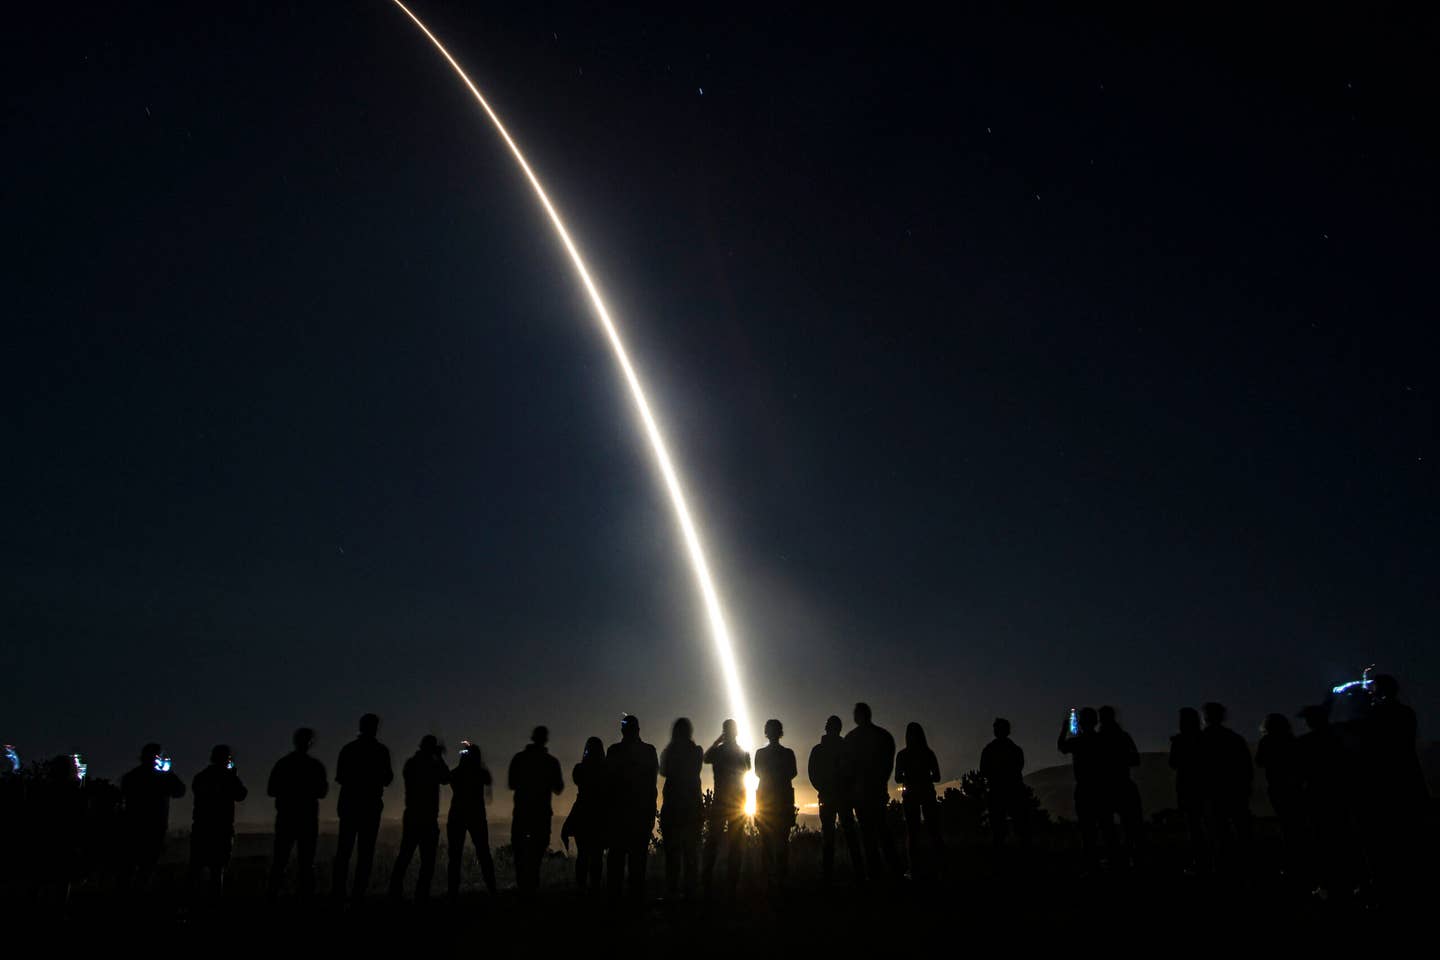 An Air Force Global Strike Command unarmed Minuteman III Intercontinental Ballistic Missile launches during an operational test at 1:13 A.M. PDT, Sept. 7 at Vandenberg Space Force Base, Calif. <em>Credit: U.S. Air Force photo by Airman 1st Class Ryan Quijas</em>